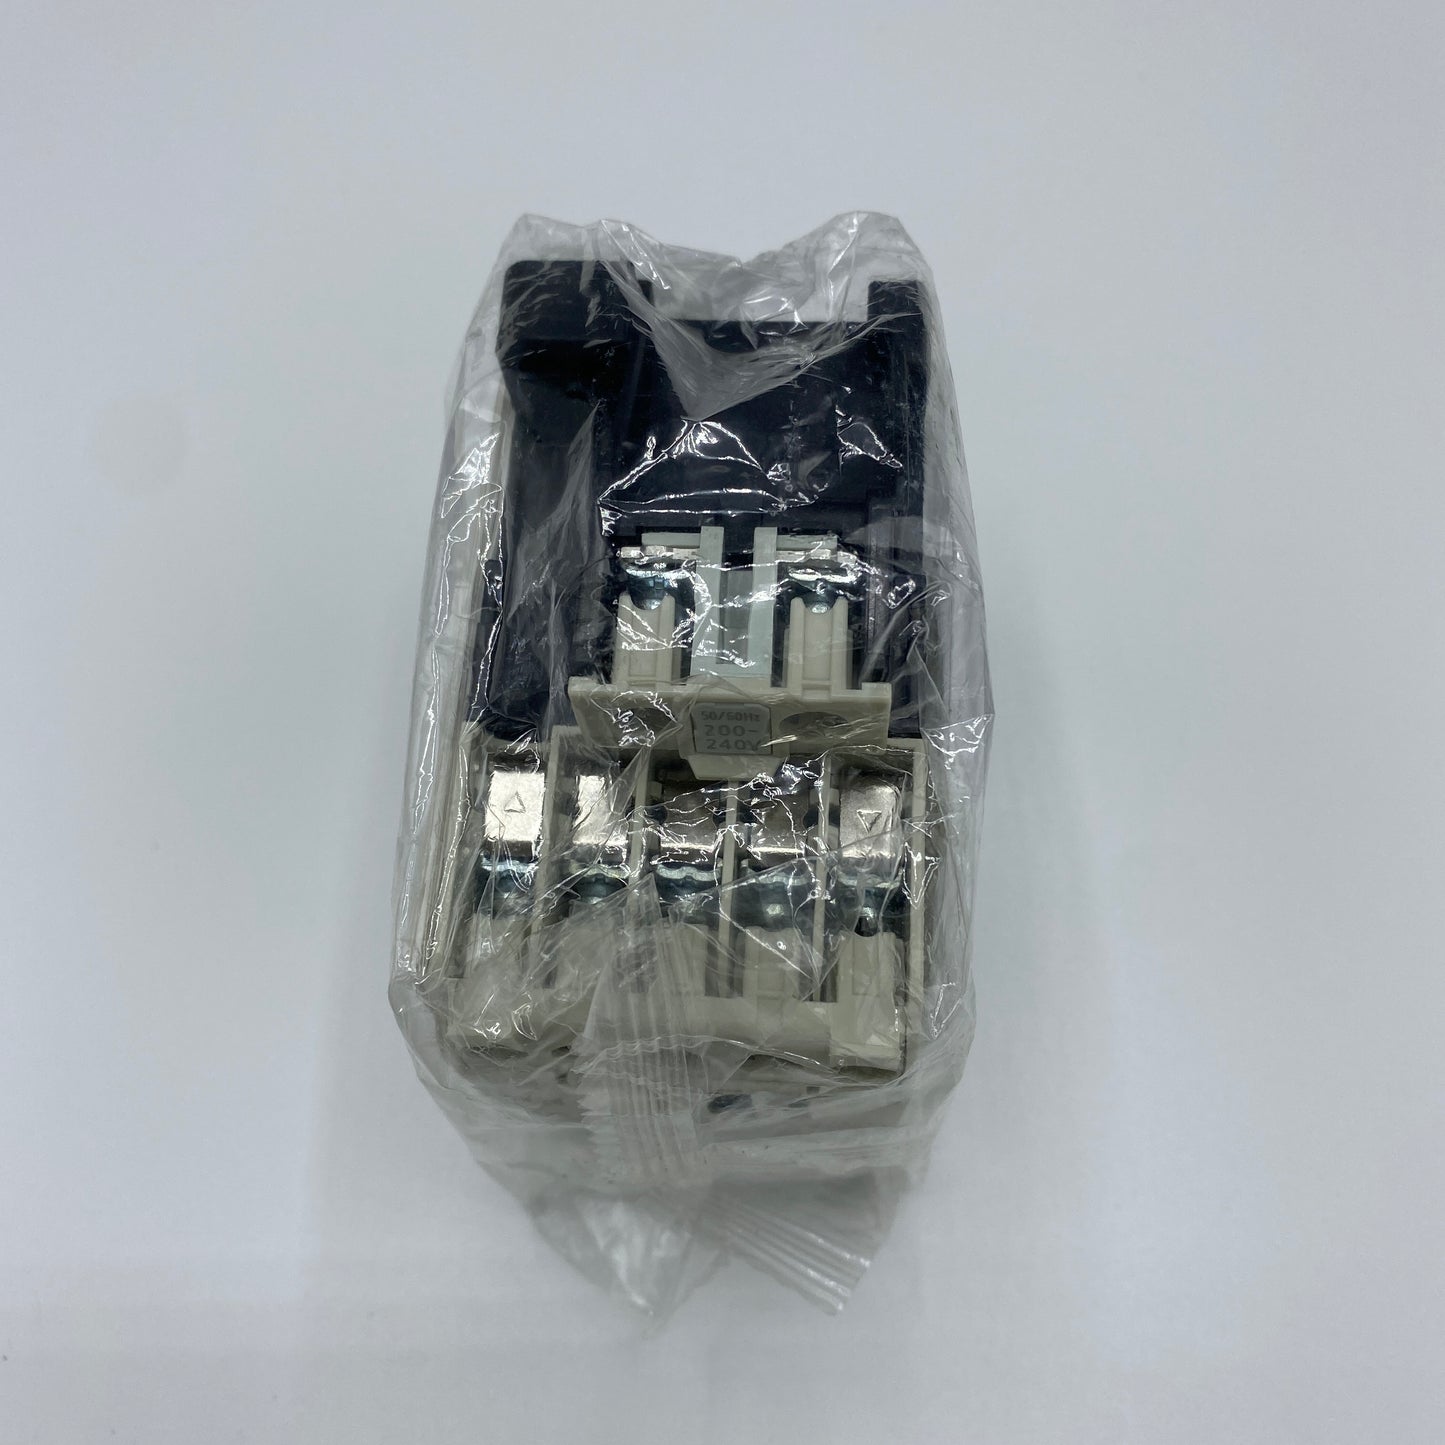 Mitsubishi Electric S-T20 Electromagnetic Contactor